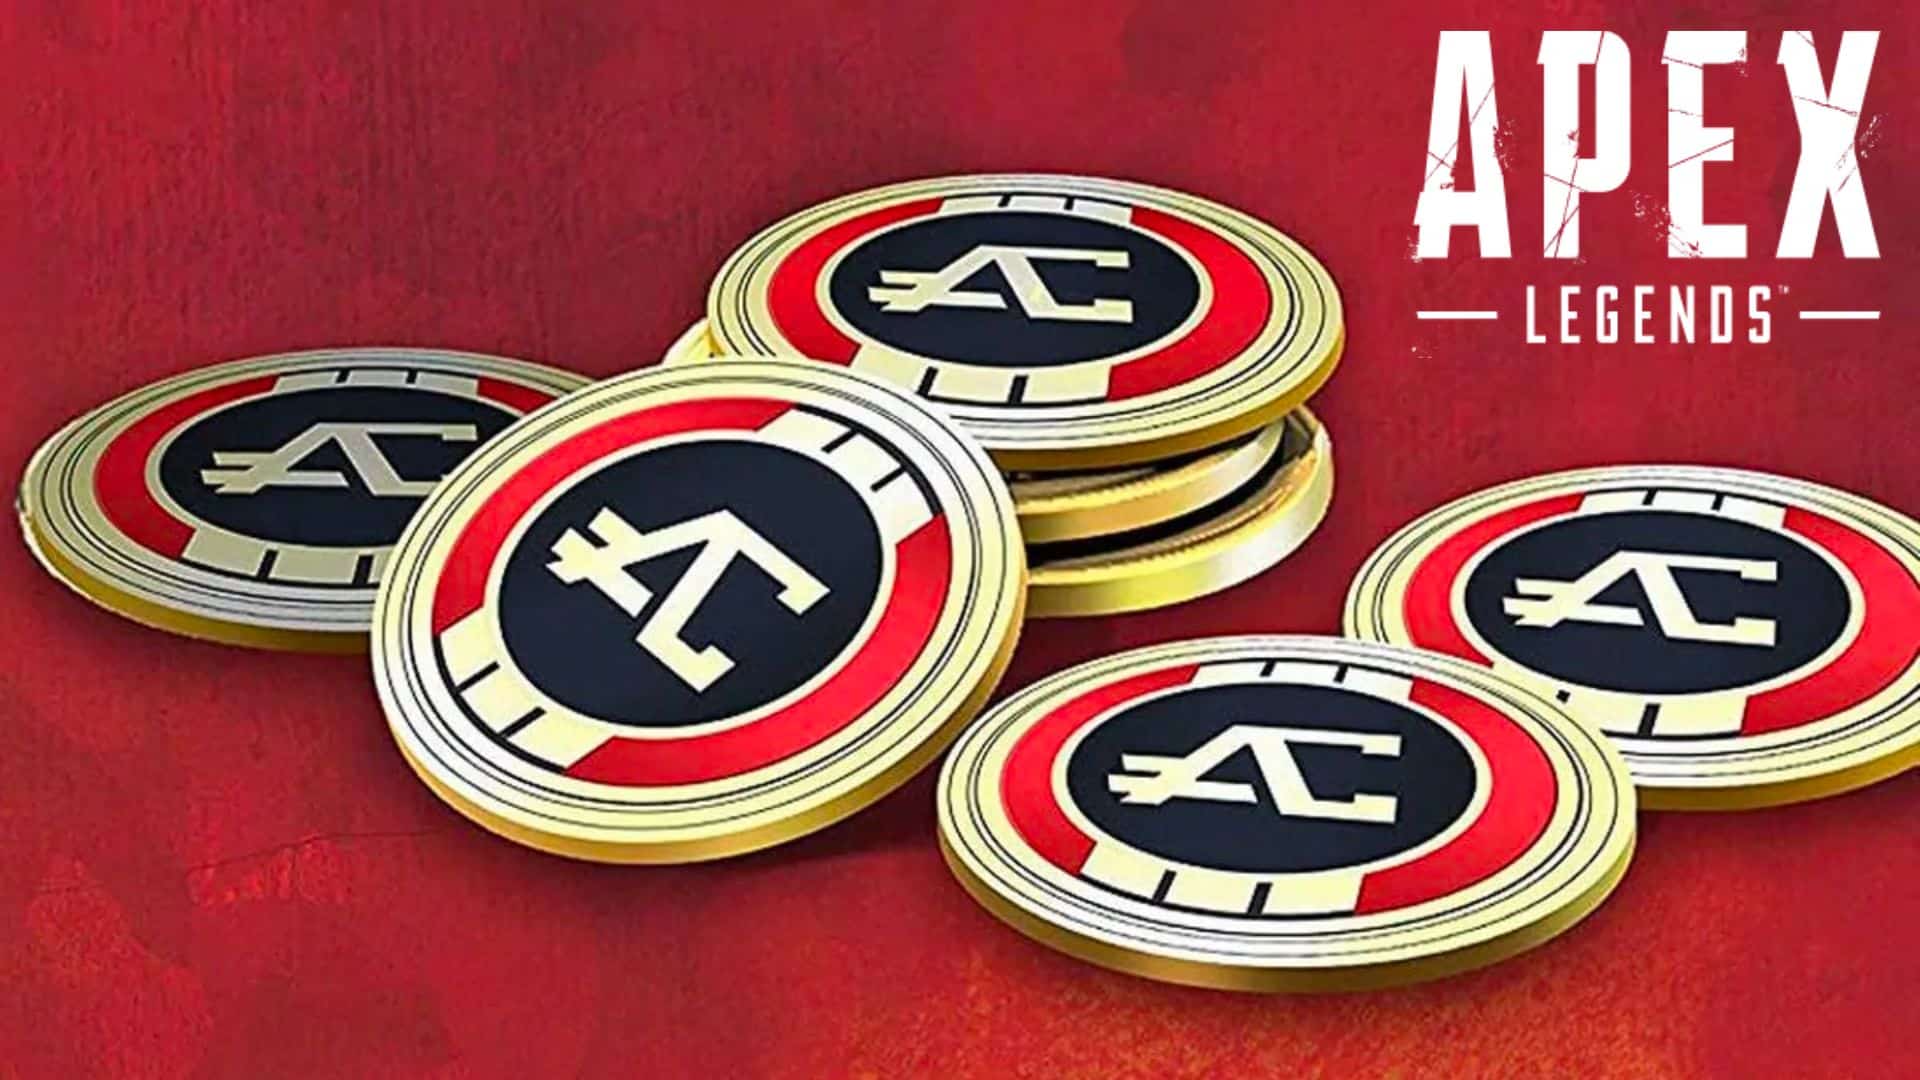 Apex Coins and Apex Legends logo on red background